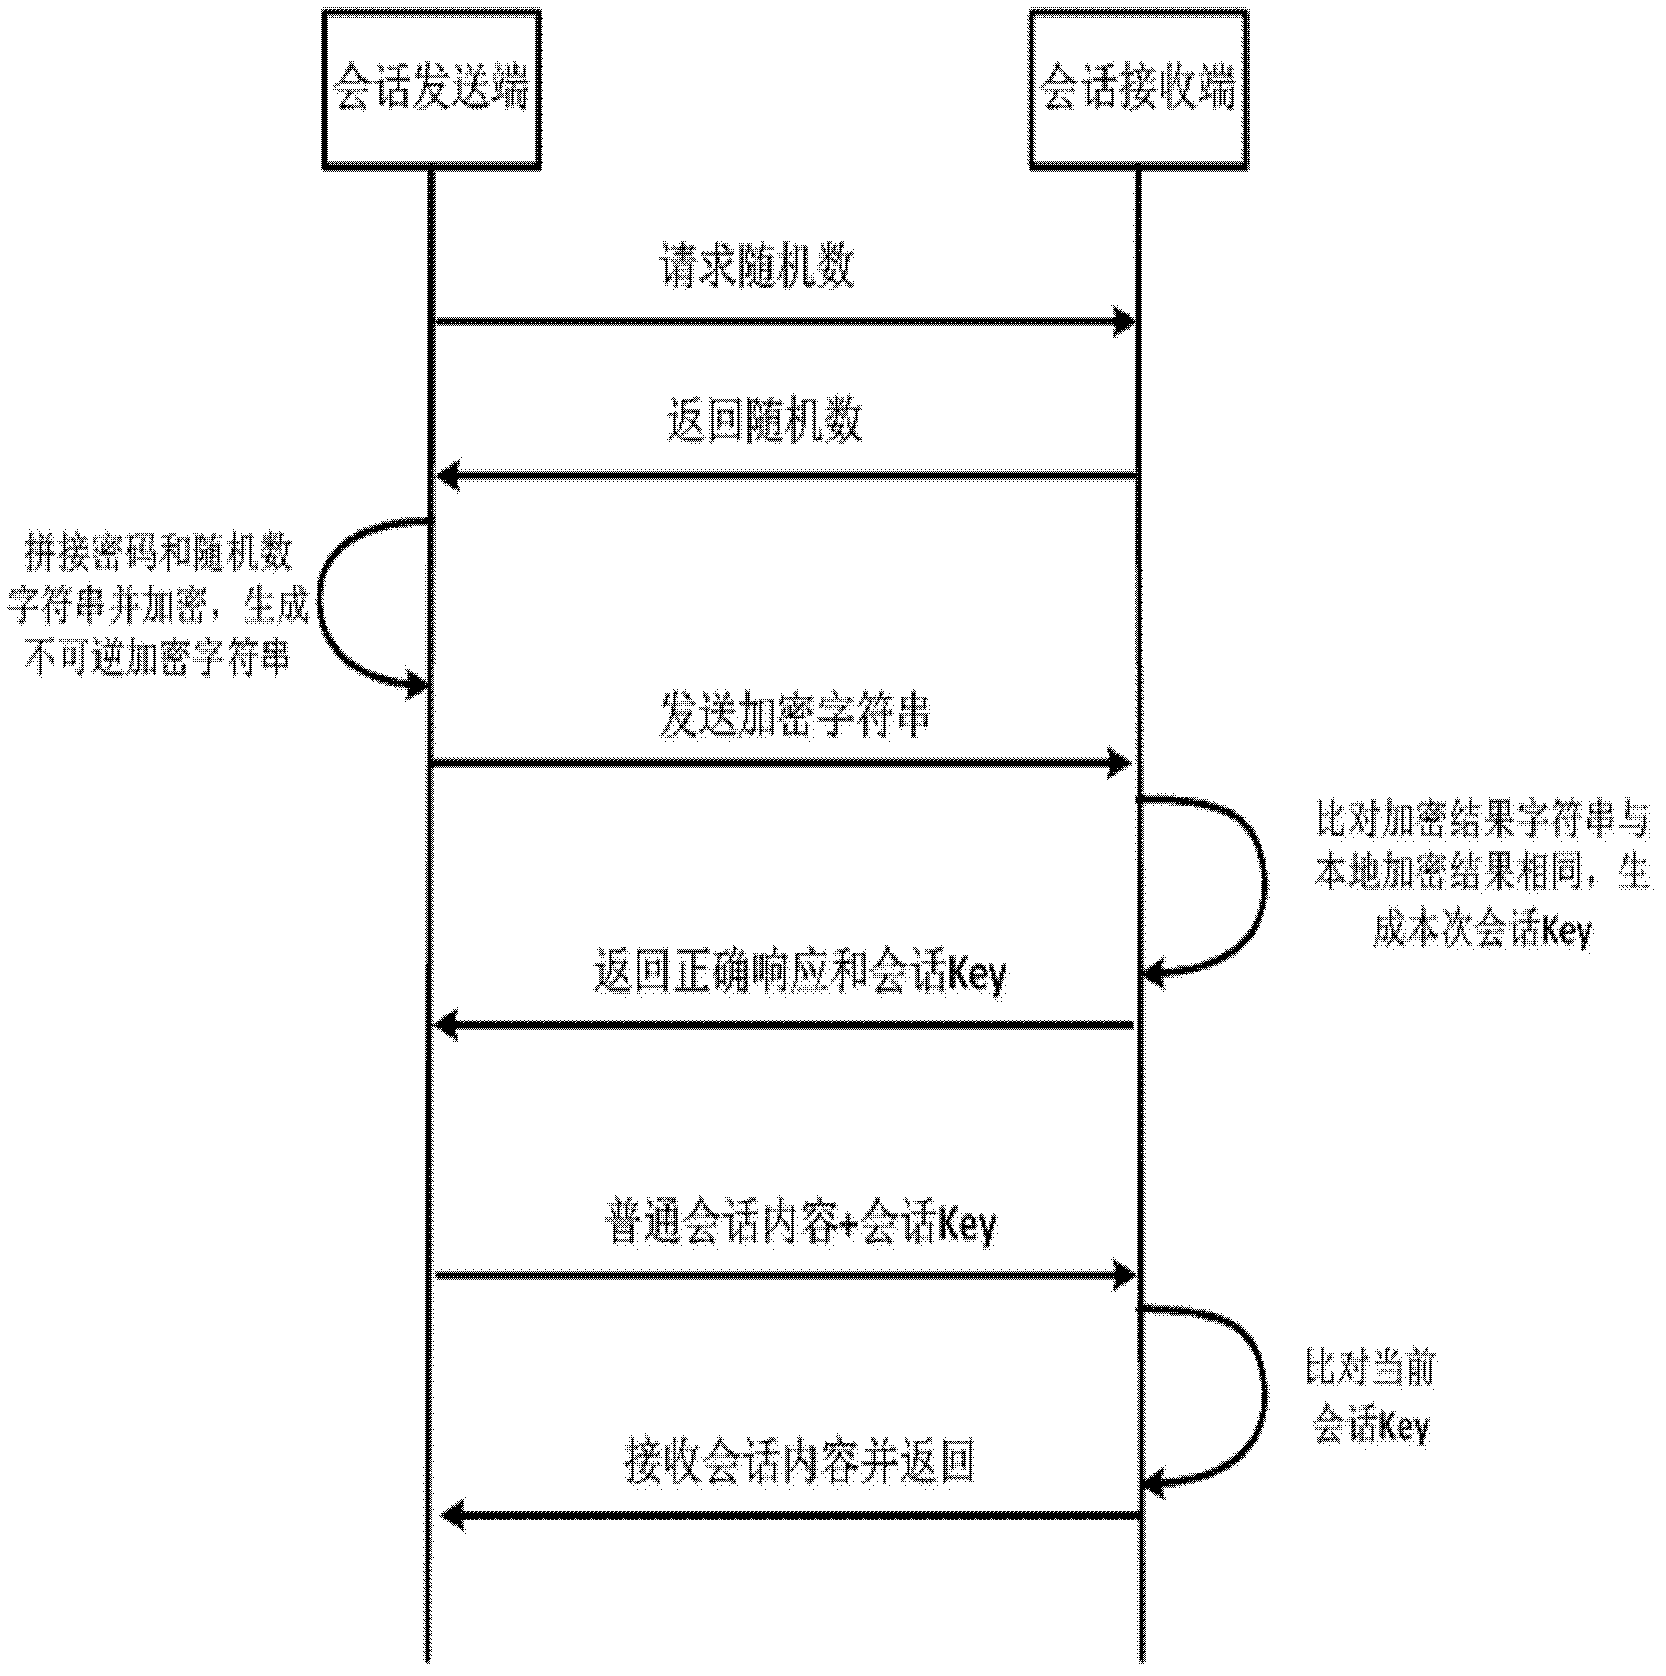 Delivery and monitoring system for outdoor electronic information broadcast network